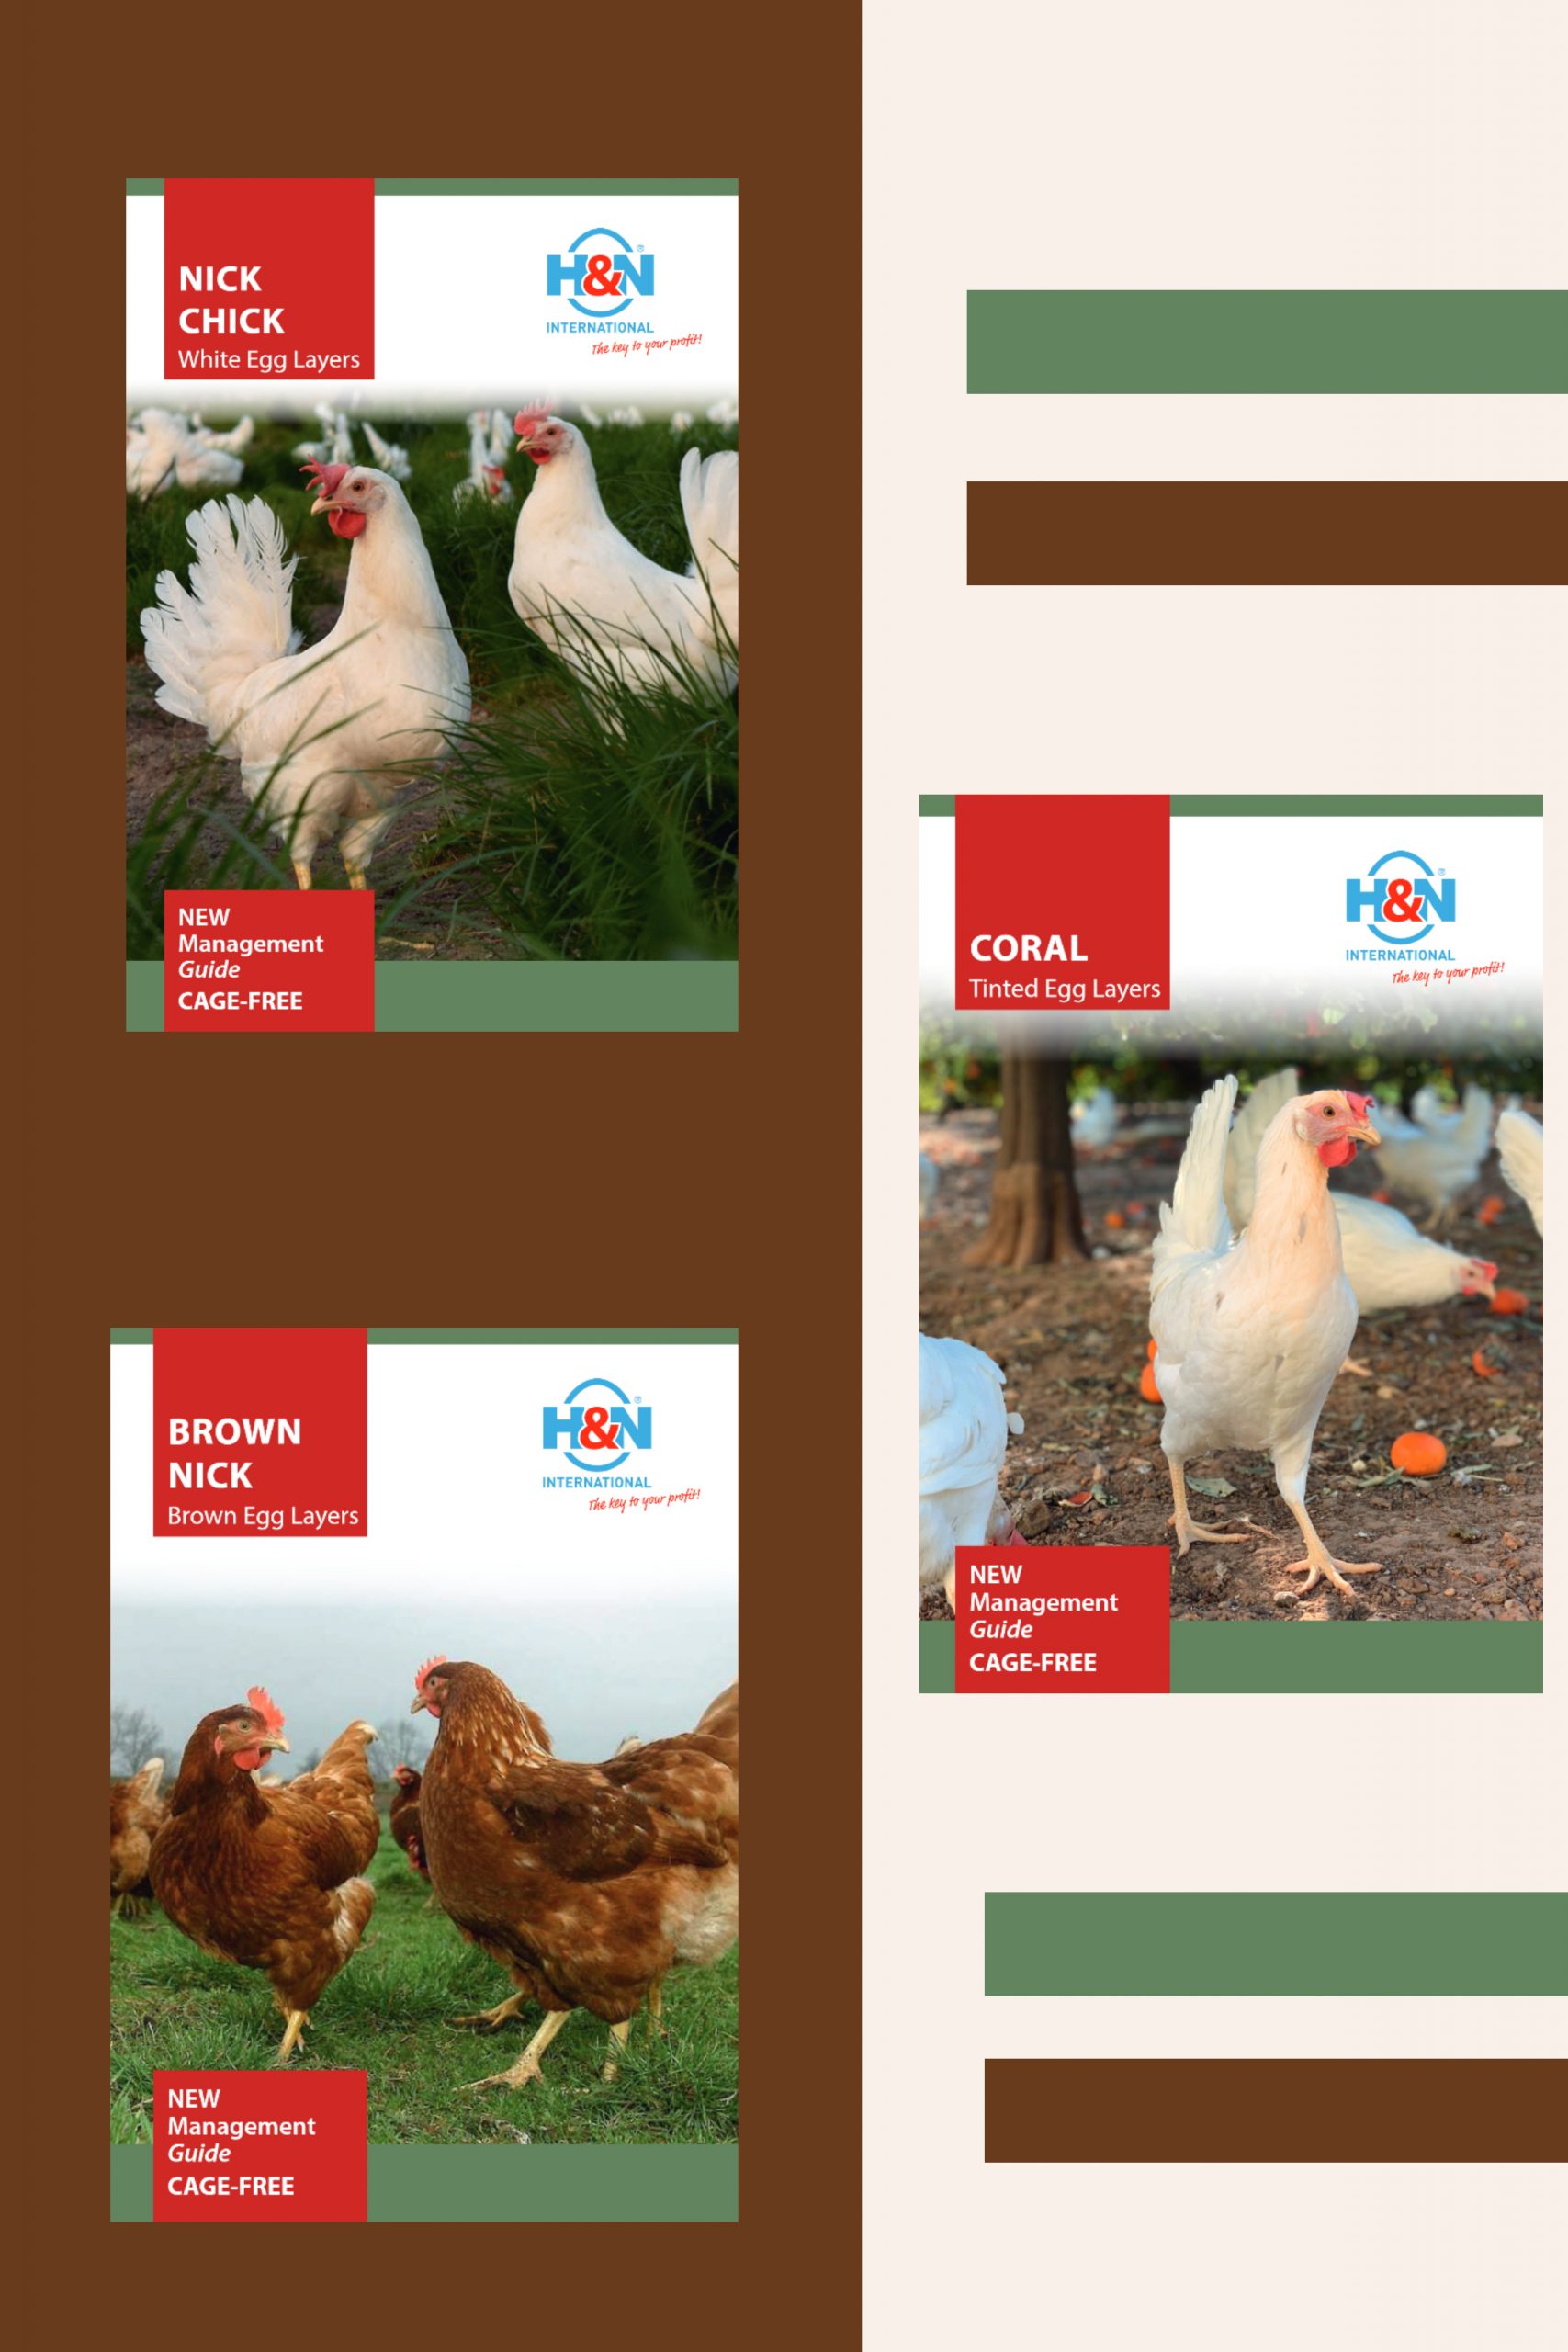 H&N International releases New Cage-Free Management Guides for each commercial layer